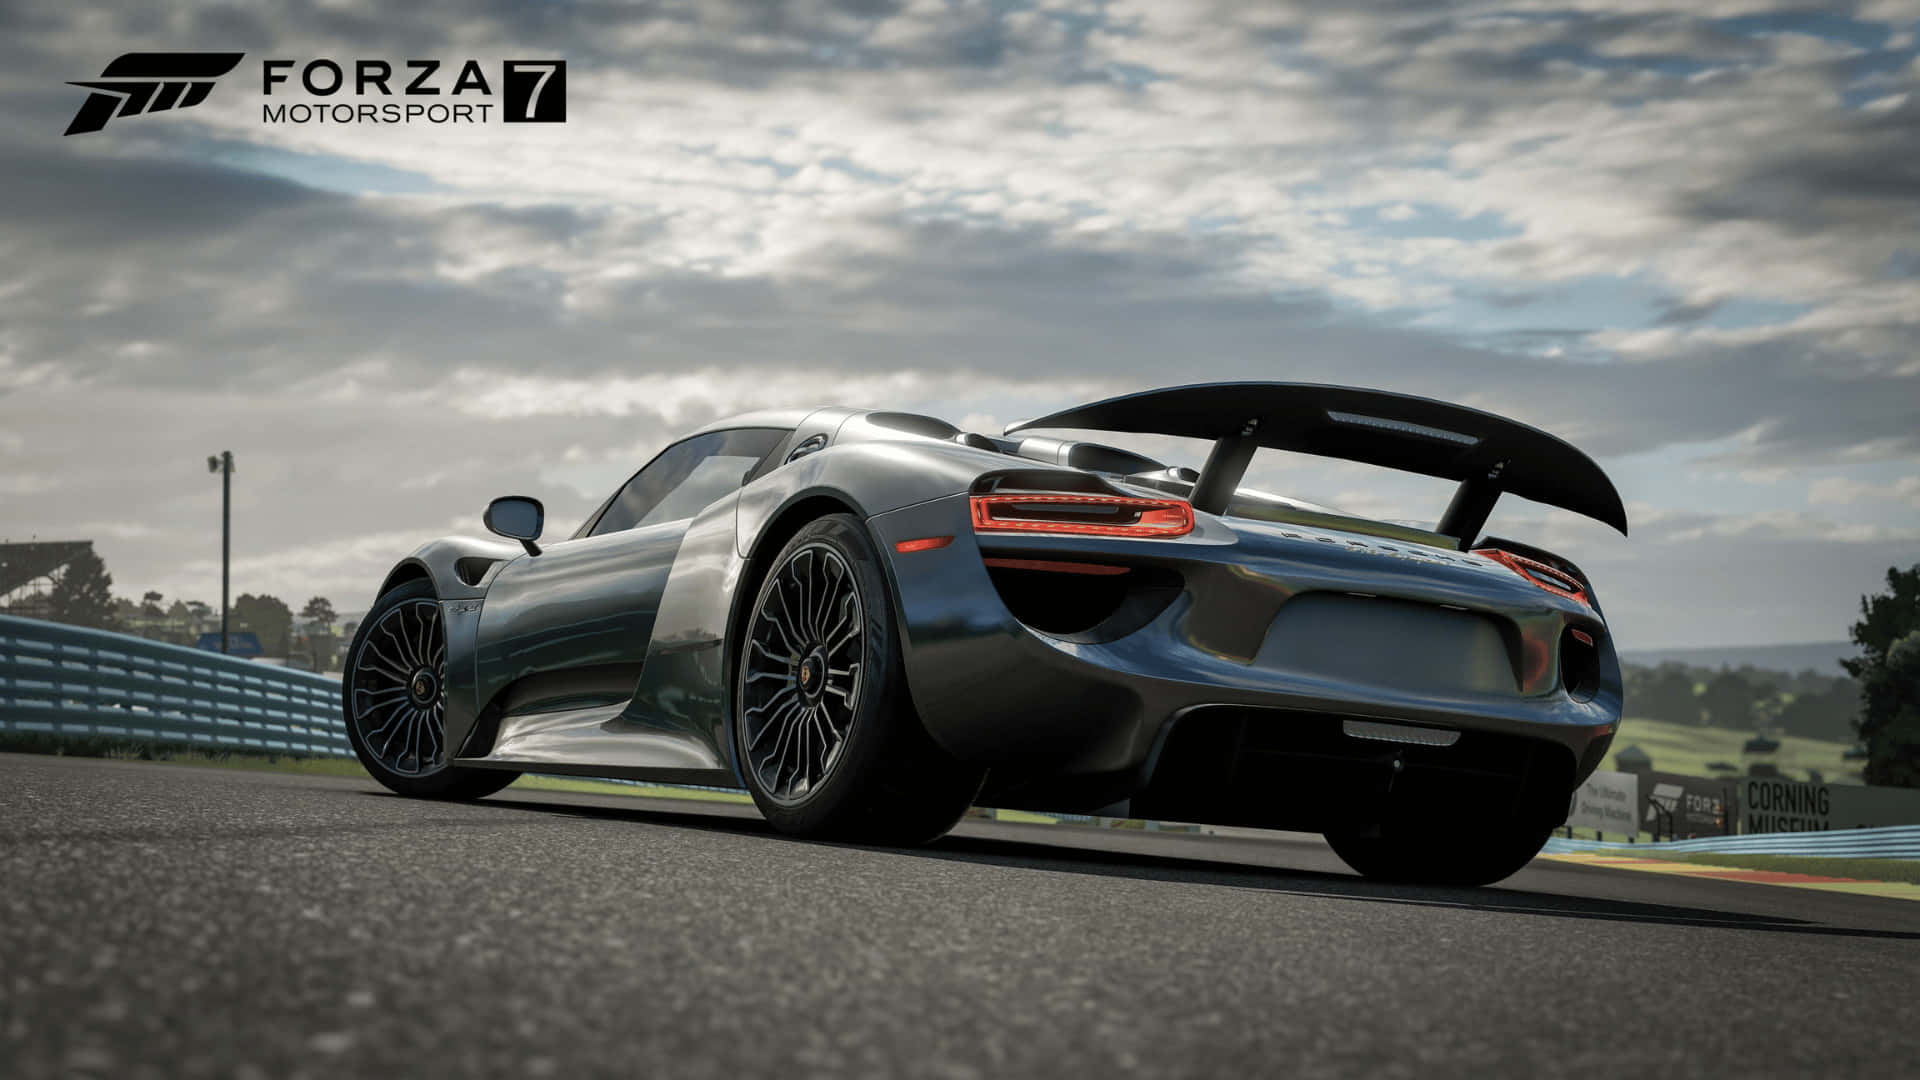 Race through the world's most iconic tracks with Forza Motorsport 7